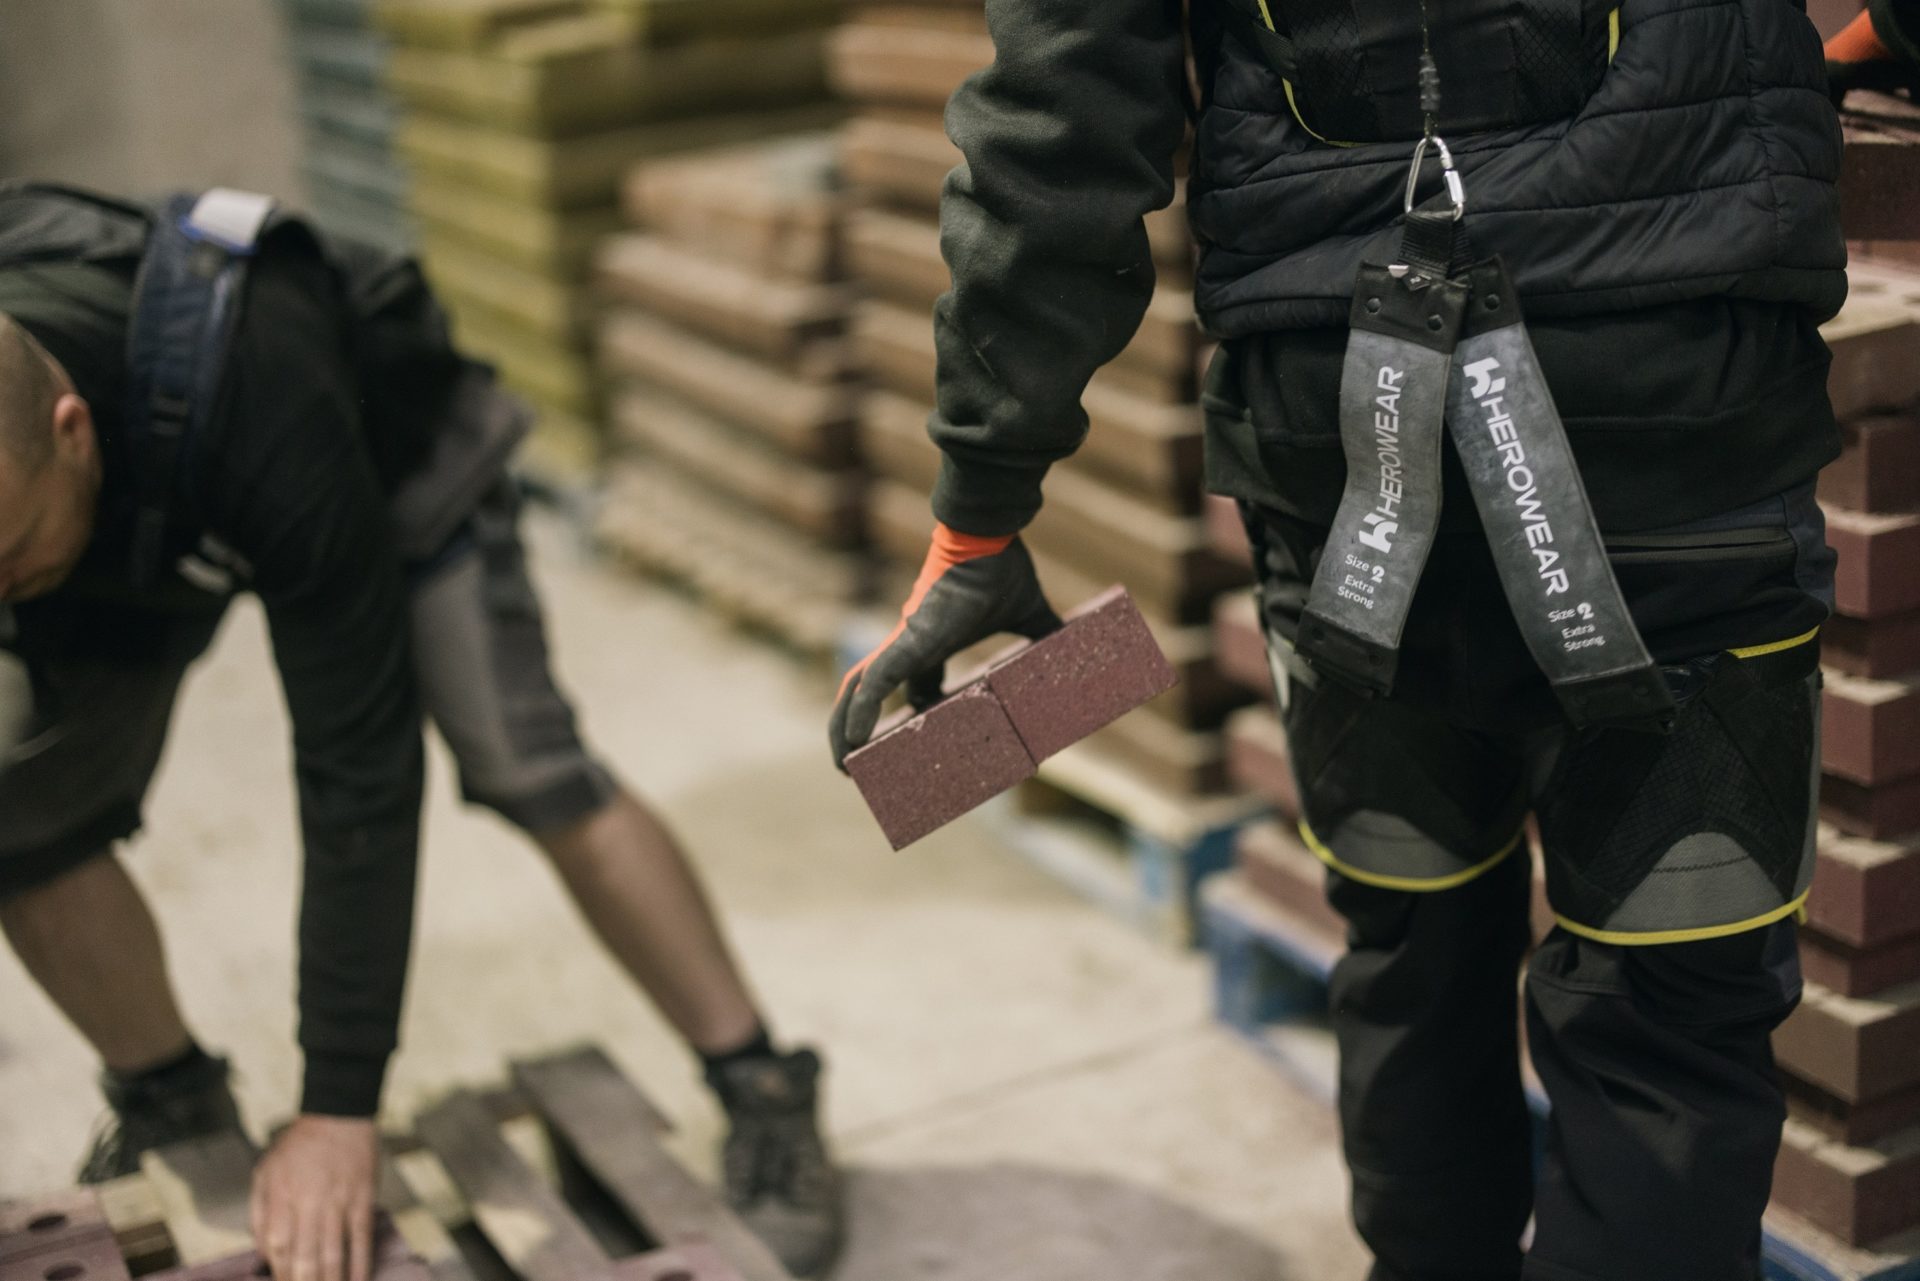 Workers lift bricks using the exoskeletons – Kenoteq is trialling two different models.